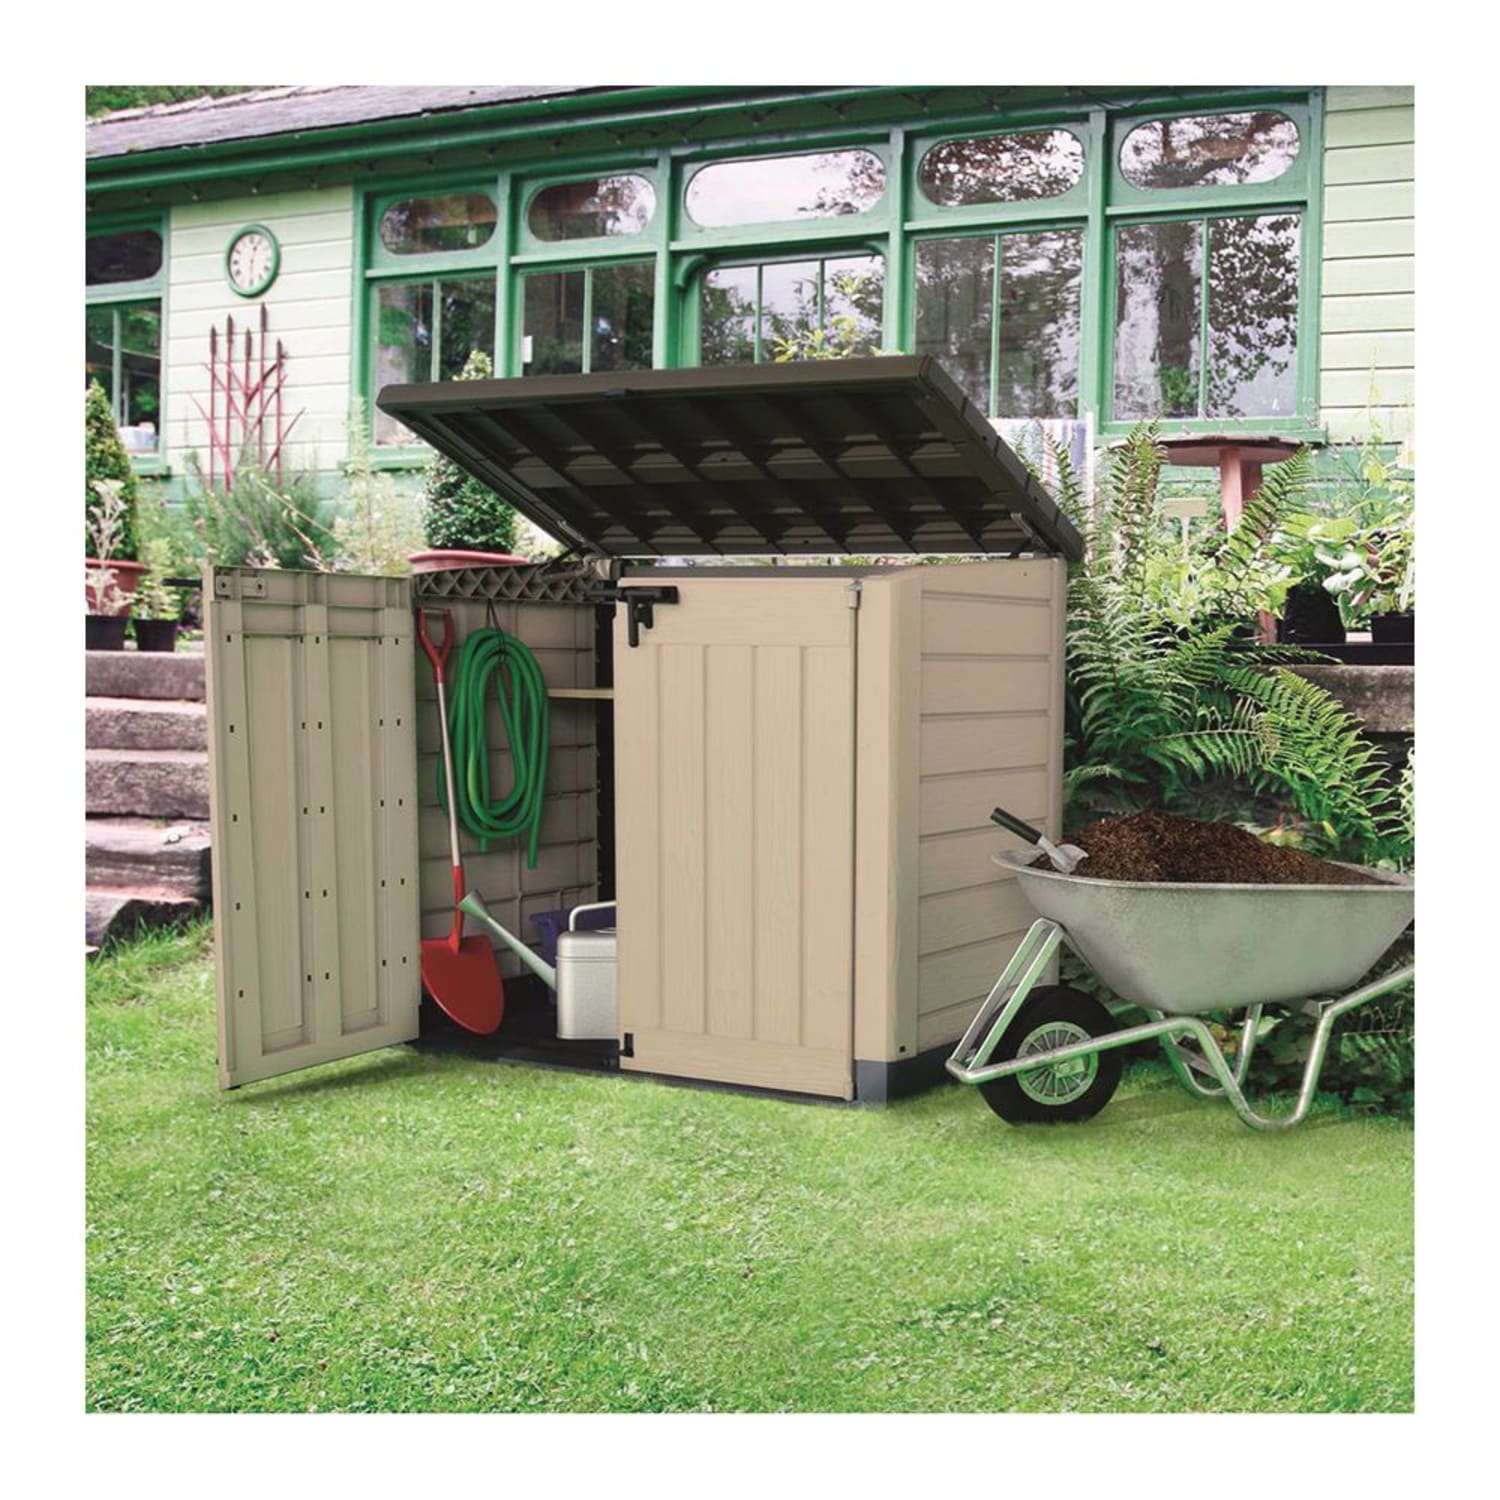 Keter Keter Store It Out MAX Garden Lockable Storage Box XL Shed Outside Bike Bin Tool 